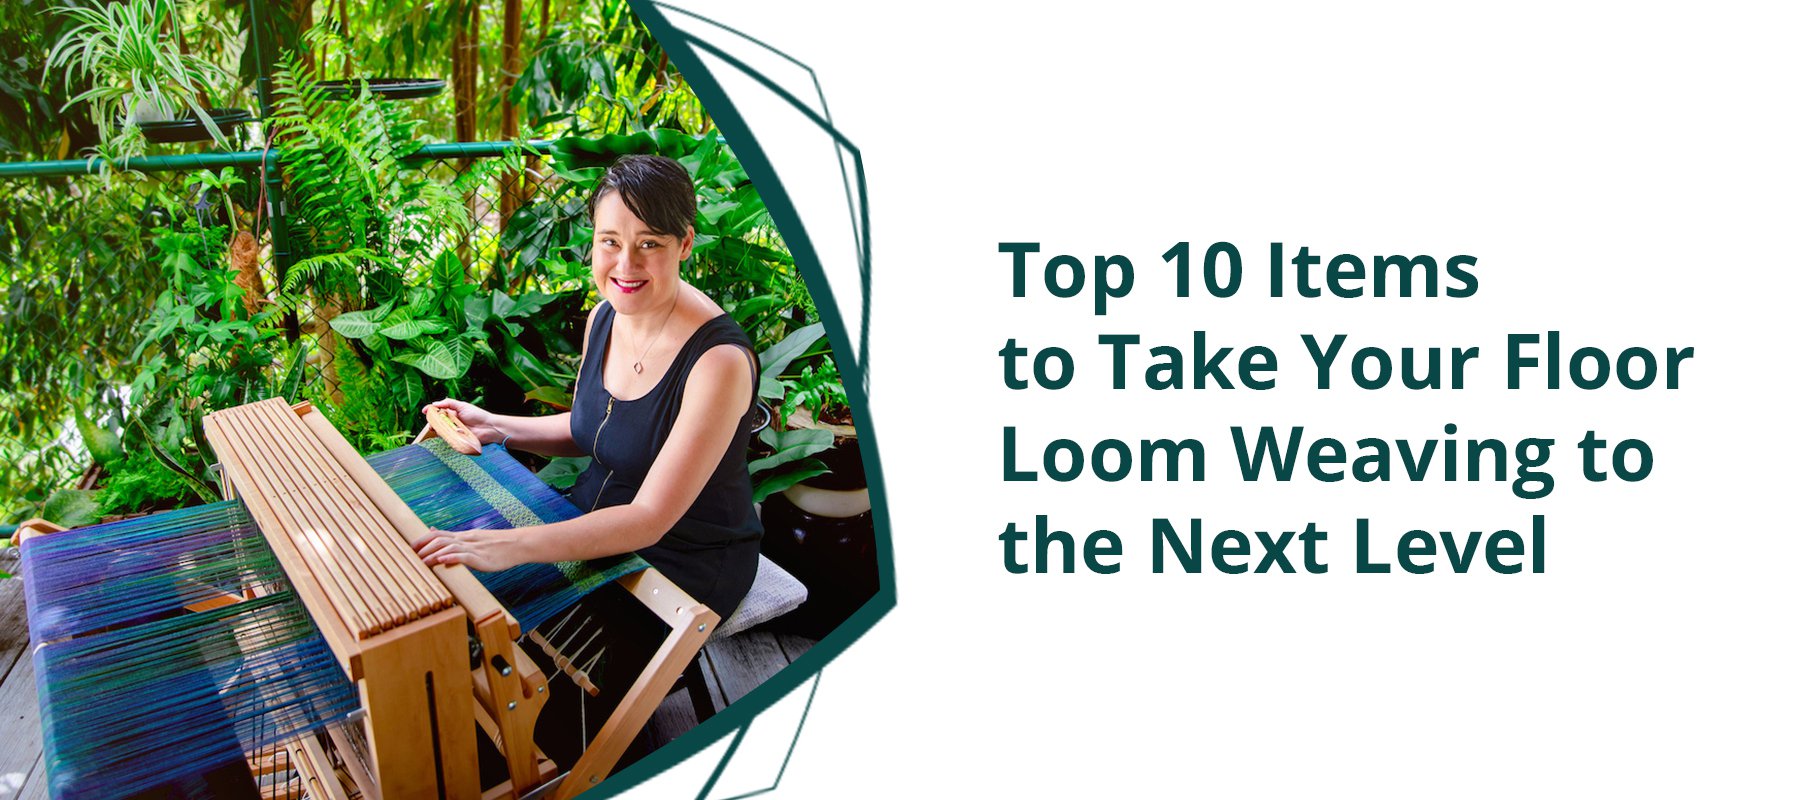 Top 10 Items to Take Your Floor Loom Weaving to the Next Level